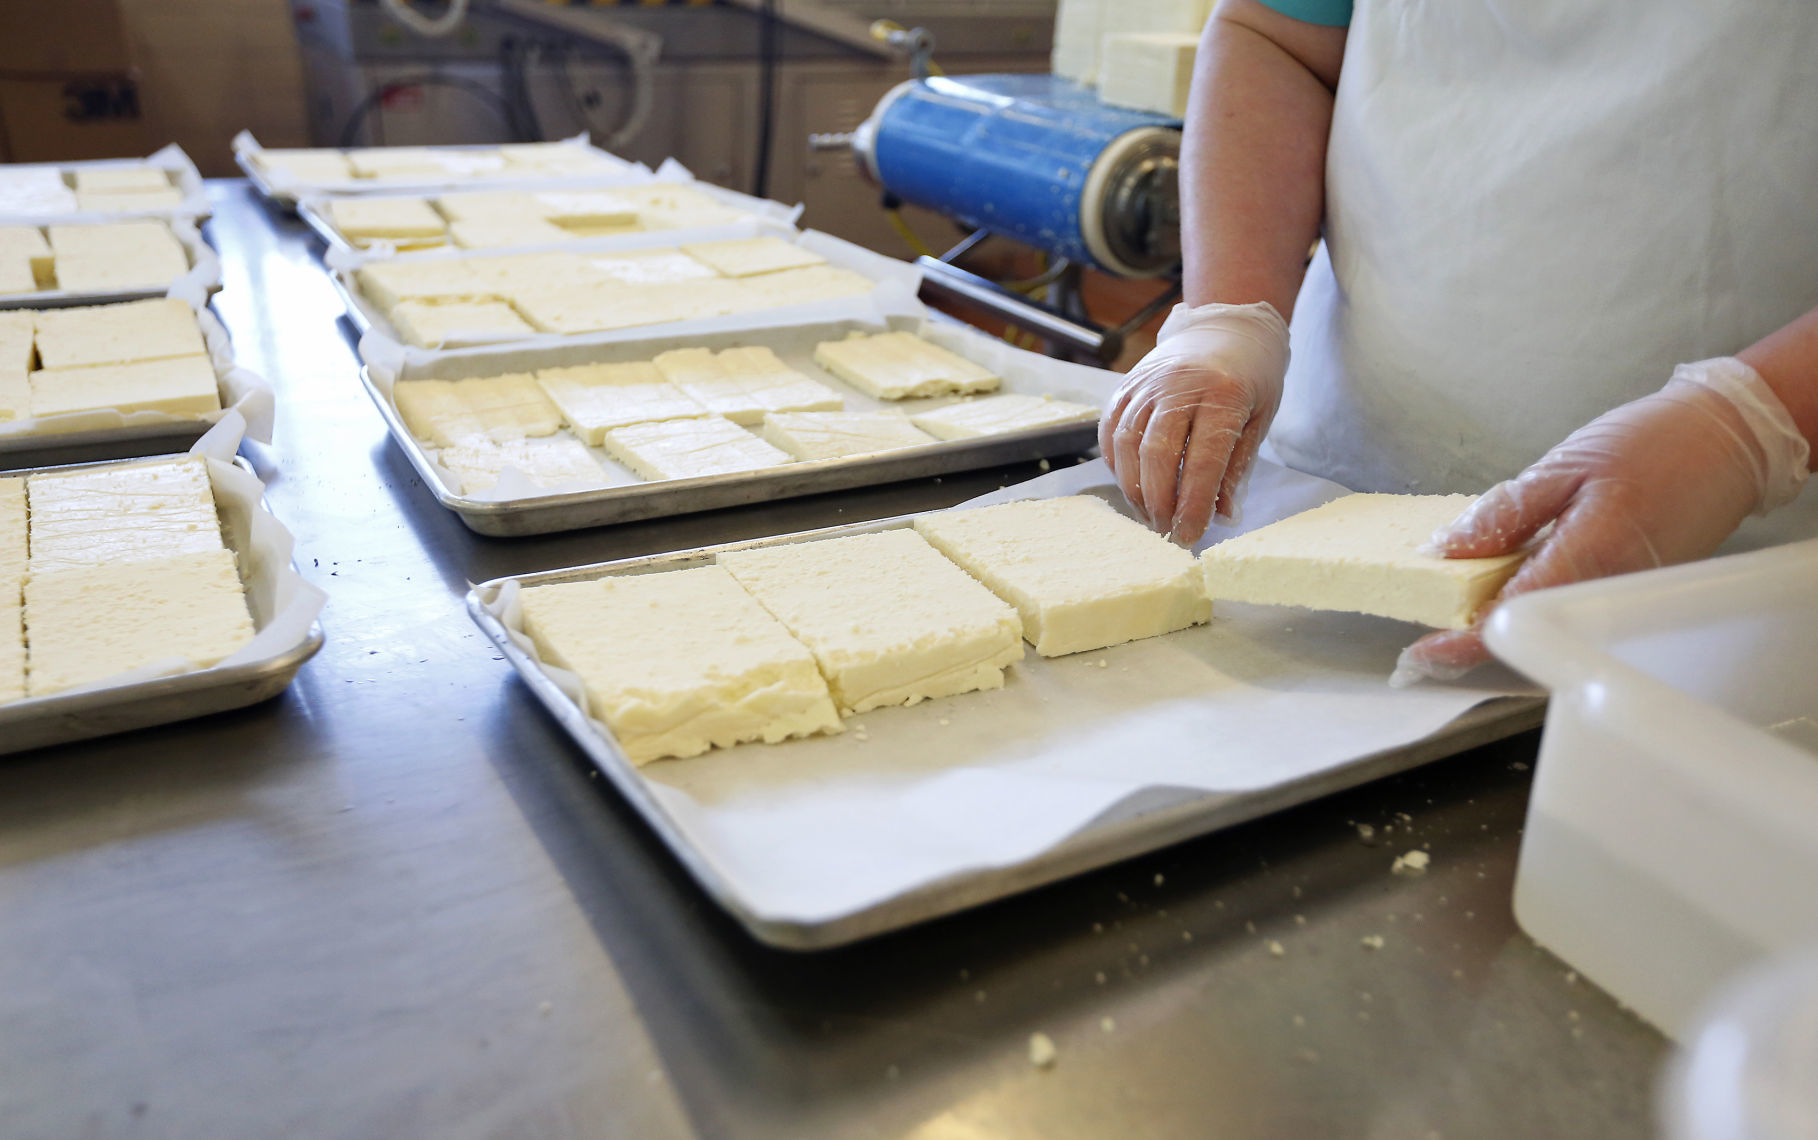 Amanda Collins, of Mount Hope, Wis., prepares cheese to be put in the oven at Carr Valley Cheese Company in Fennimore, Wis., on Thursday, Mar. 22, 2018.    PHOTO CREDIT: EILEEN MESLAR